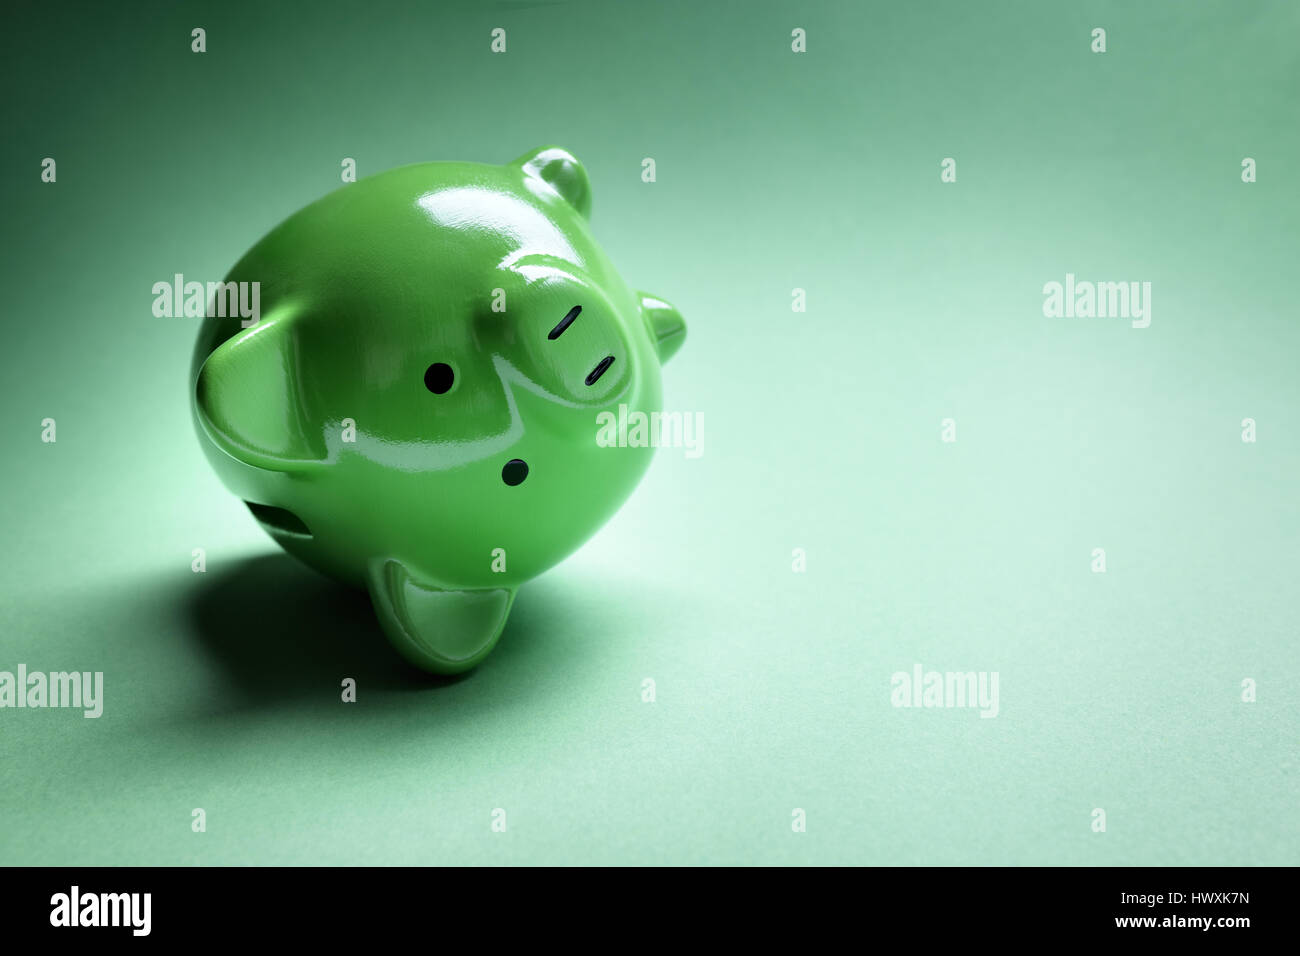 Piggy bank fallen over with financial money problems and copy space Stock Photo